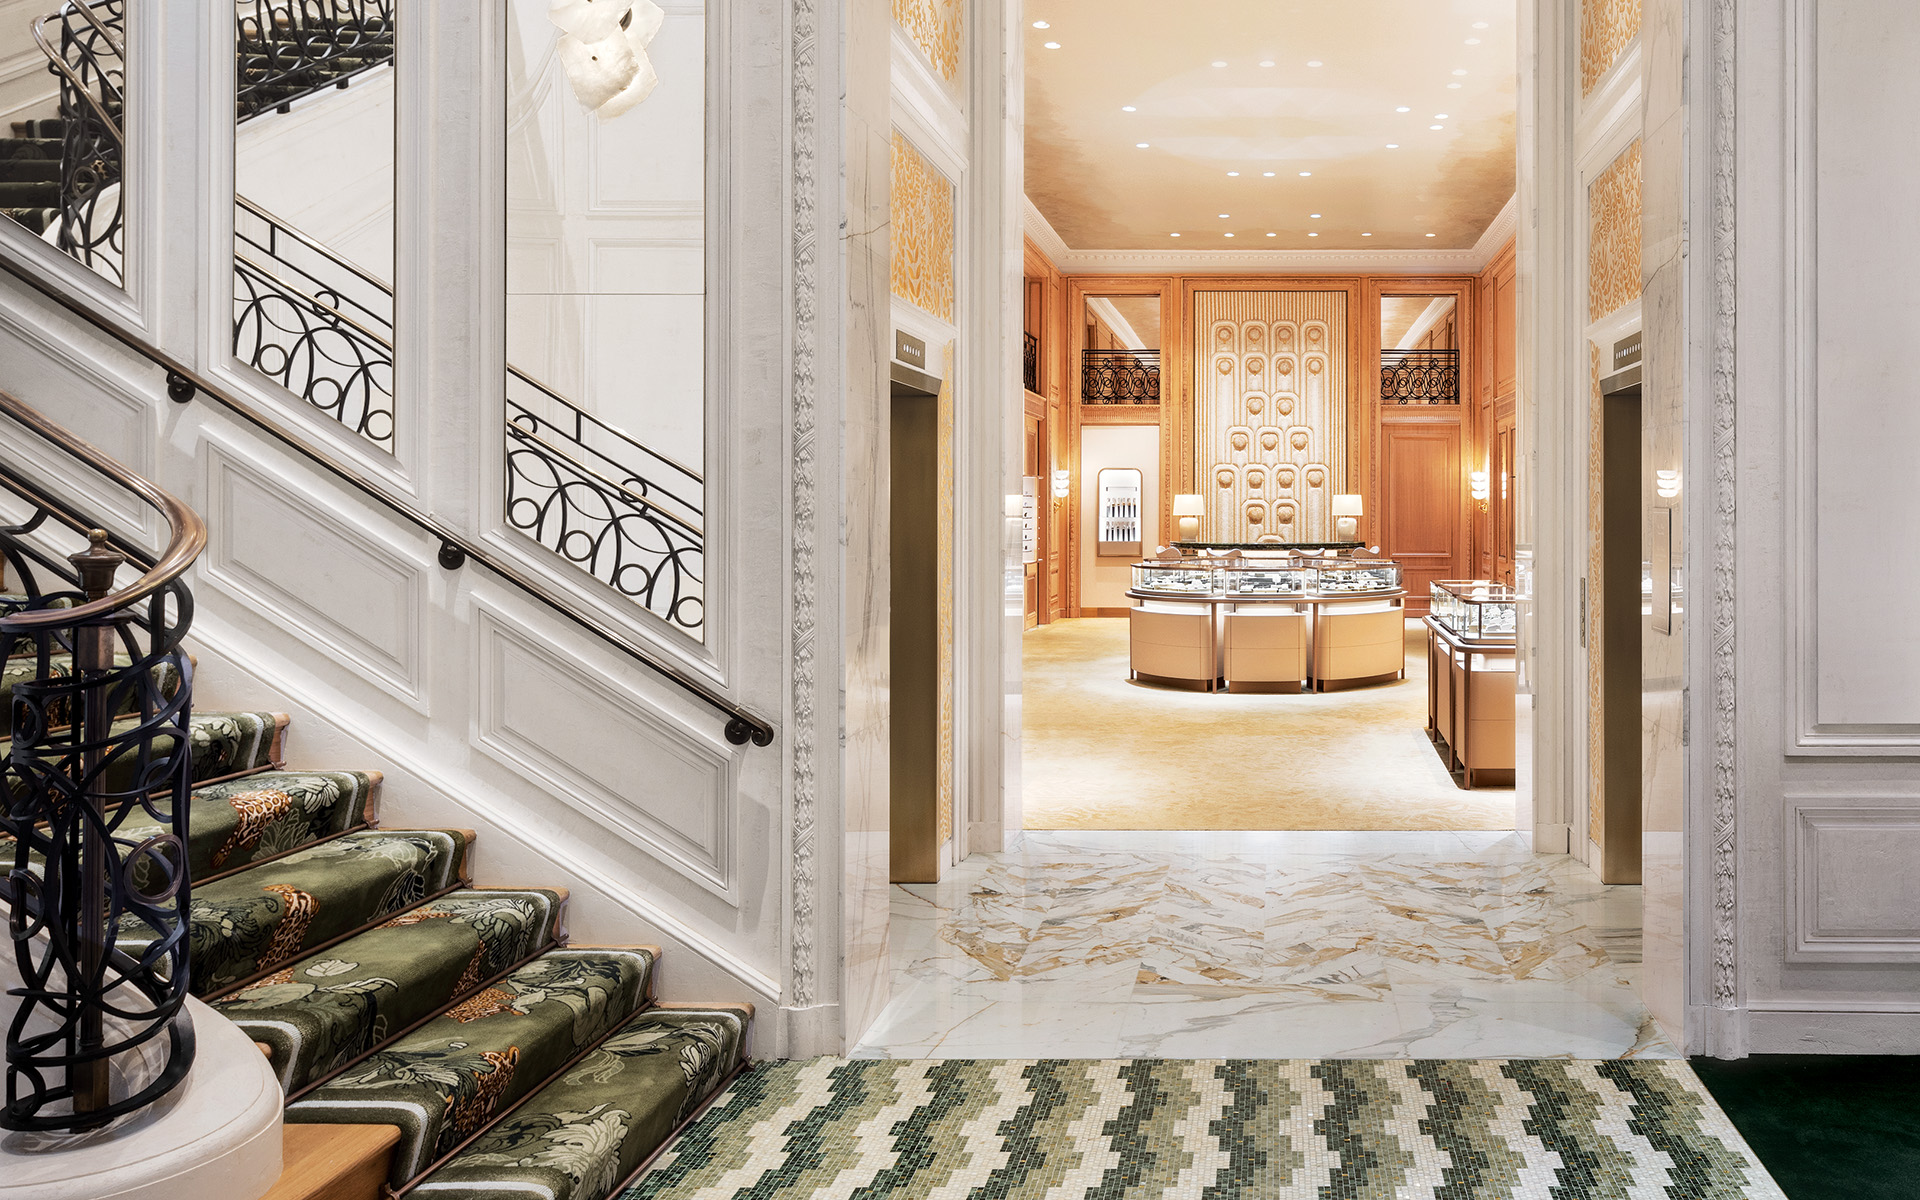 Explore Cartier's Newly Redesigned Maisons in New York and Paris